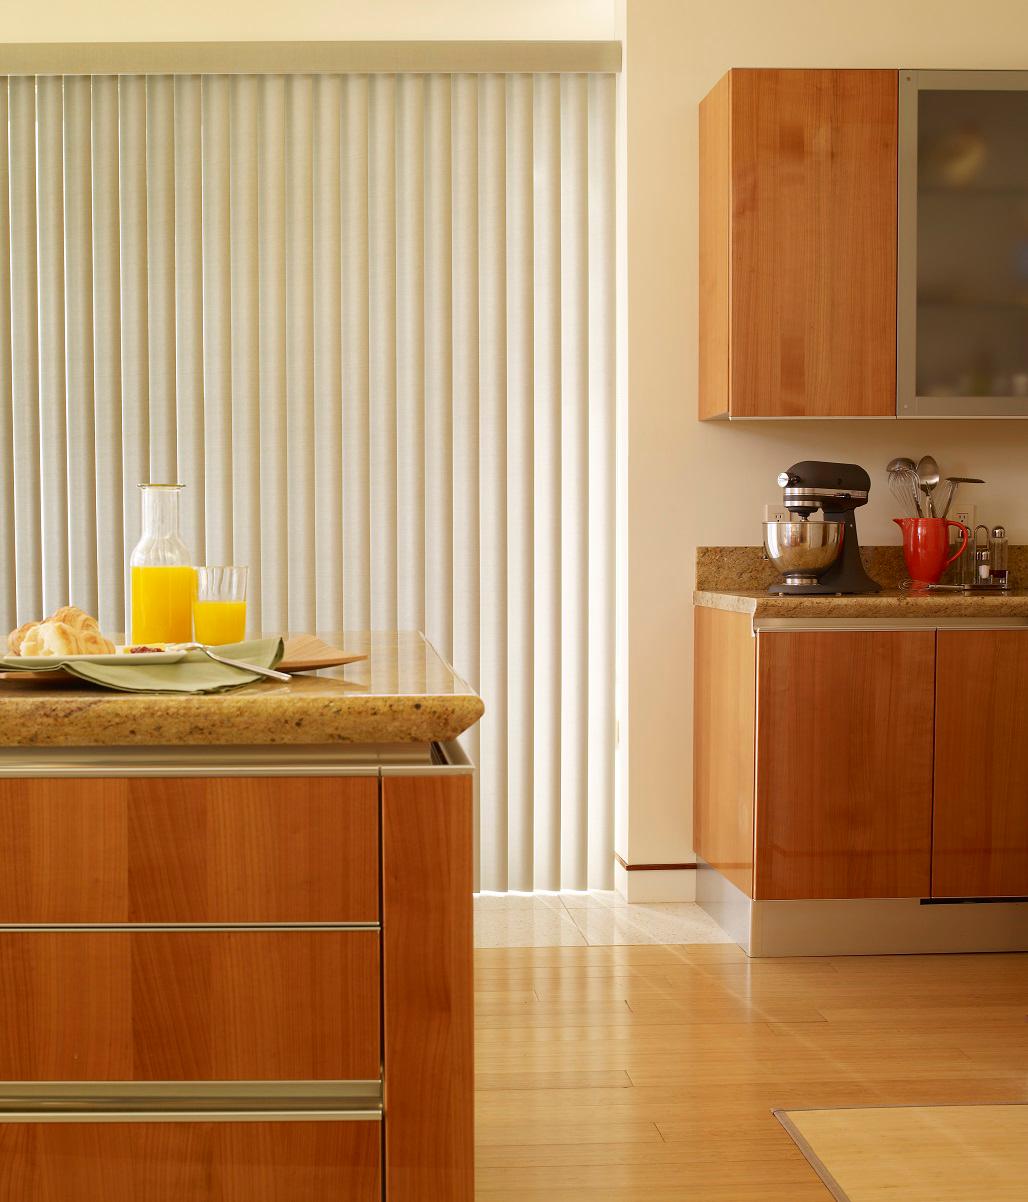 Ready to be enlightened? Then try our Enlightened Vertical Blinds! They're sleek,  easy to use, perfect for both windows and sliding doors-and they look amazing in this kitchen.  BudgetBlindsPointLoma   VerticalBlinds  FreeConsultation  WindowWednesday